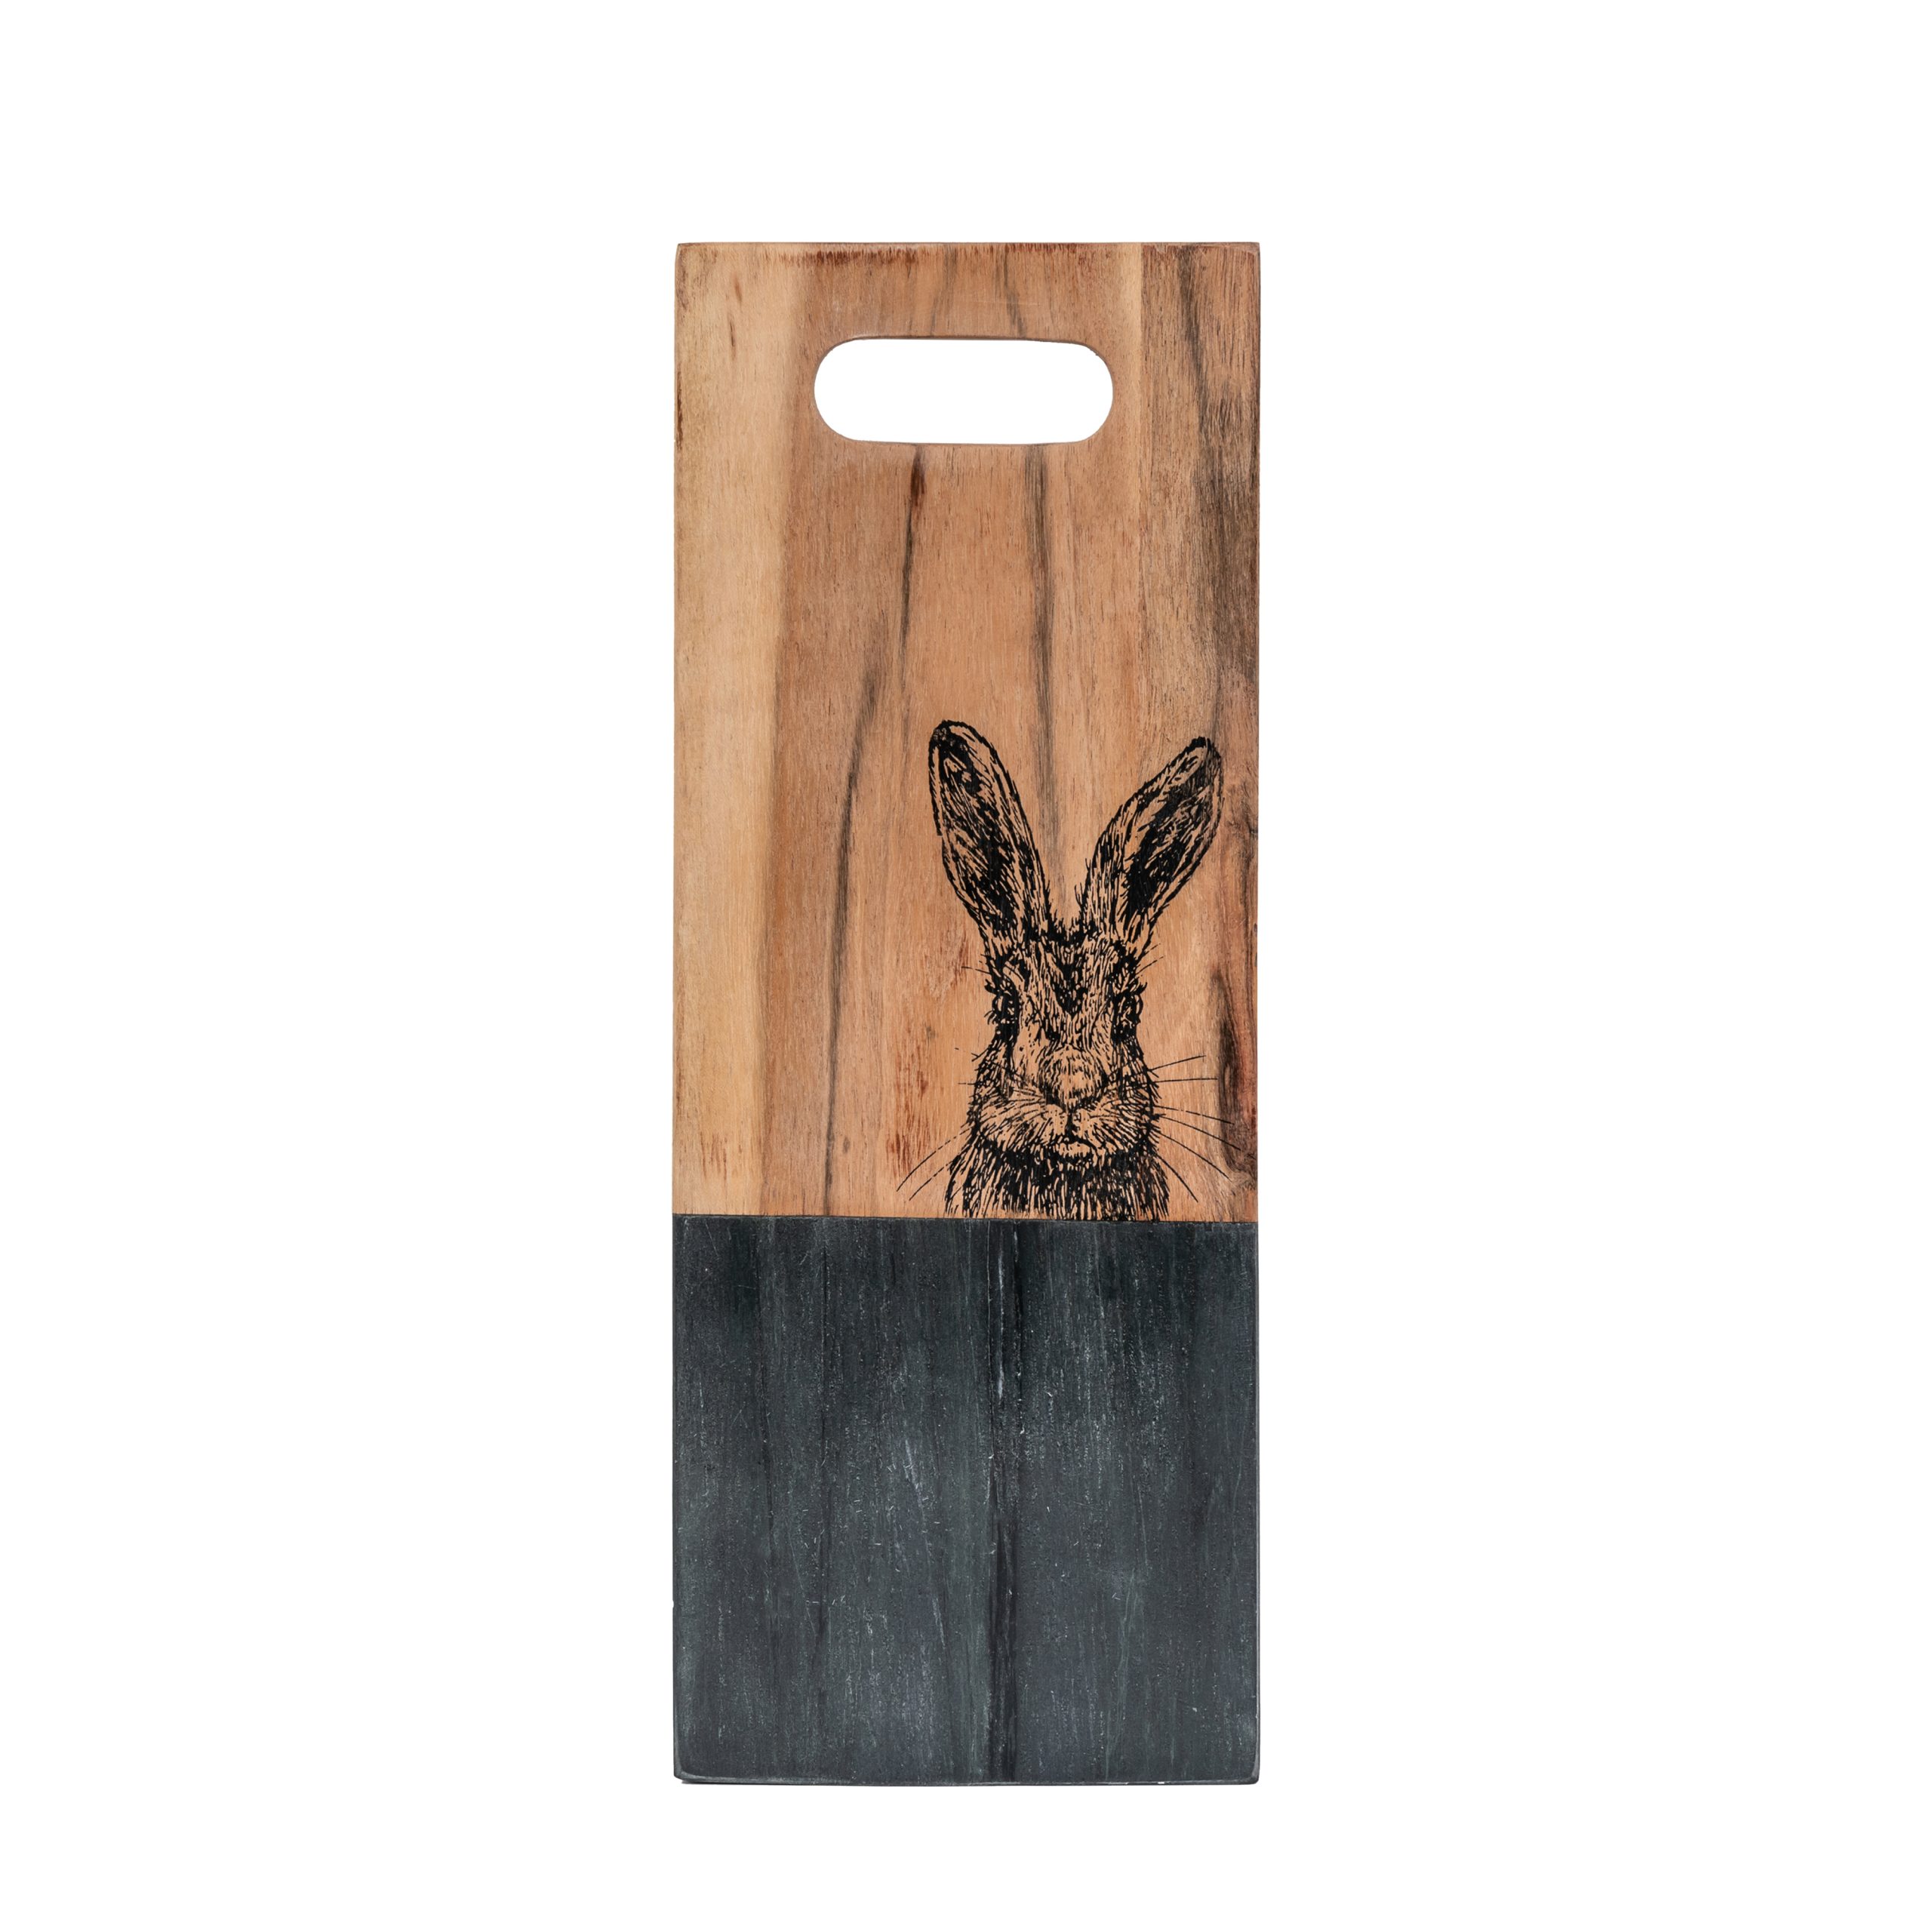 Gallery Direct Hare Board Large Black Marble